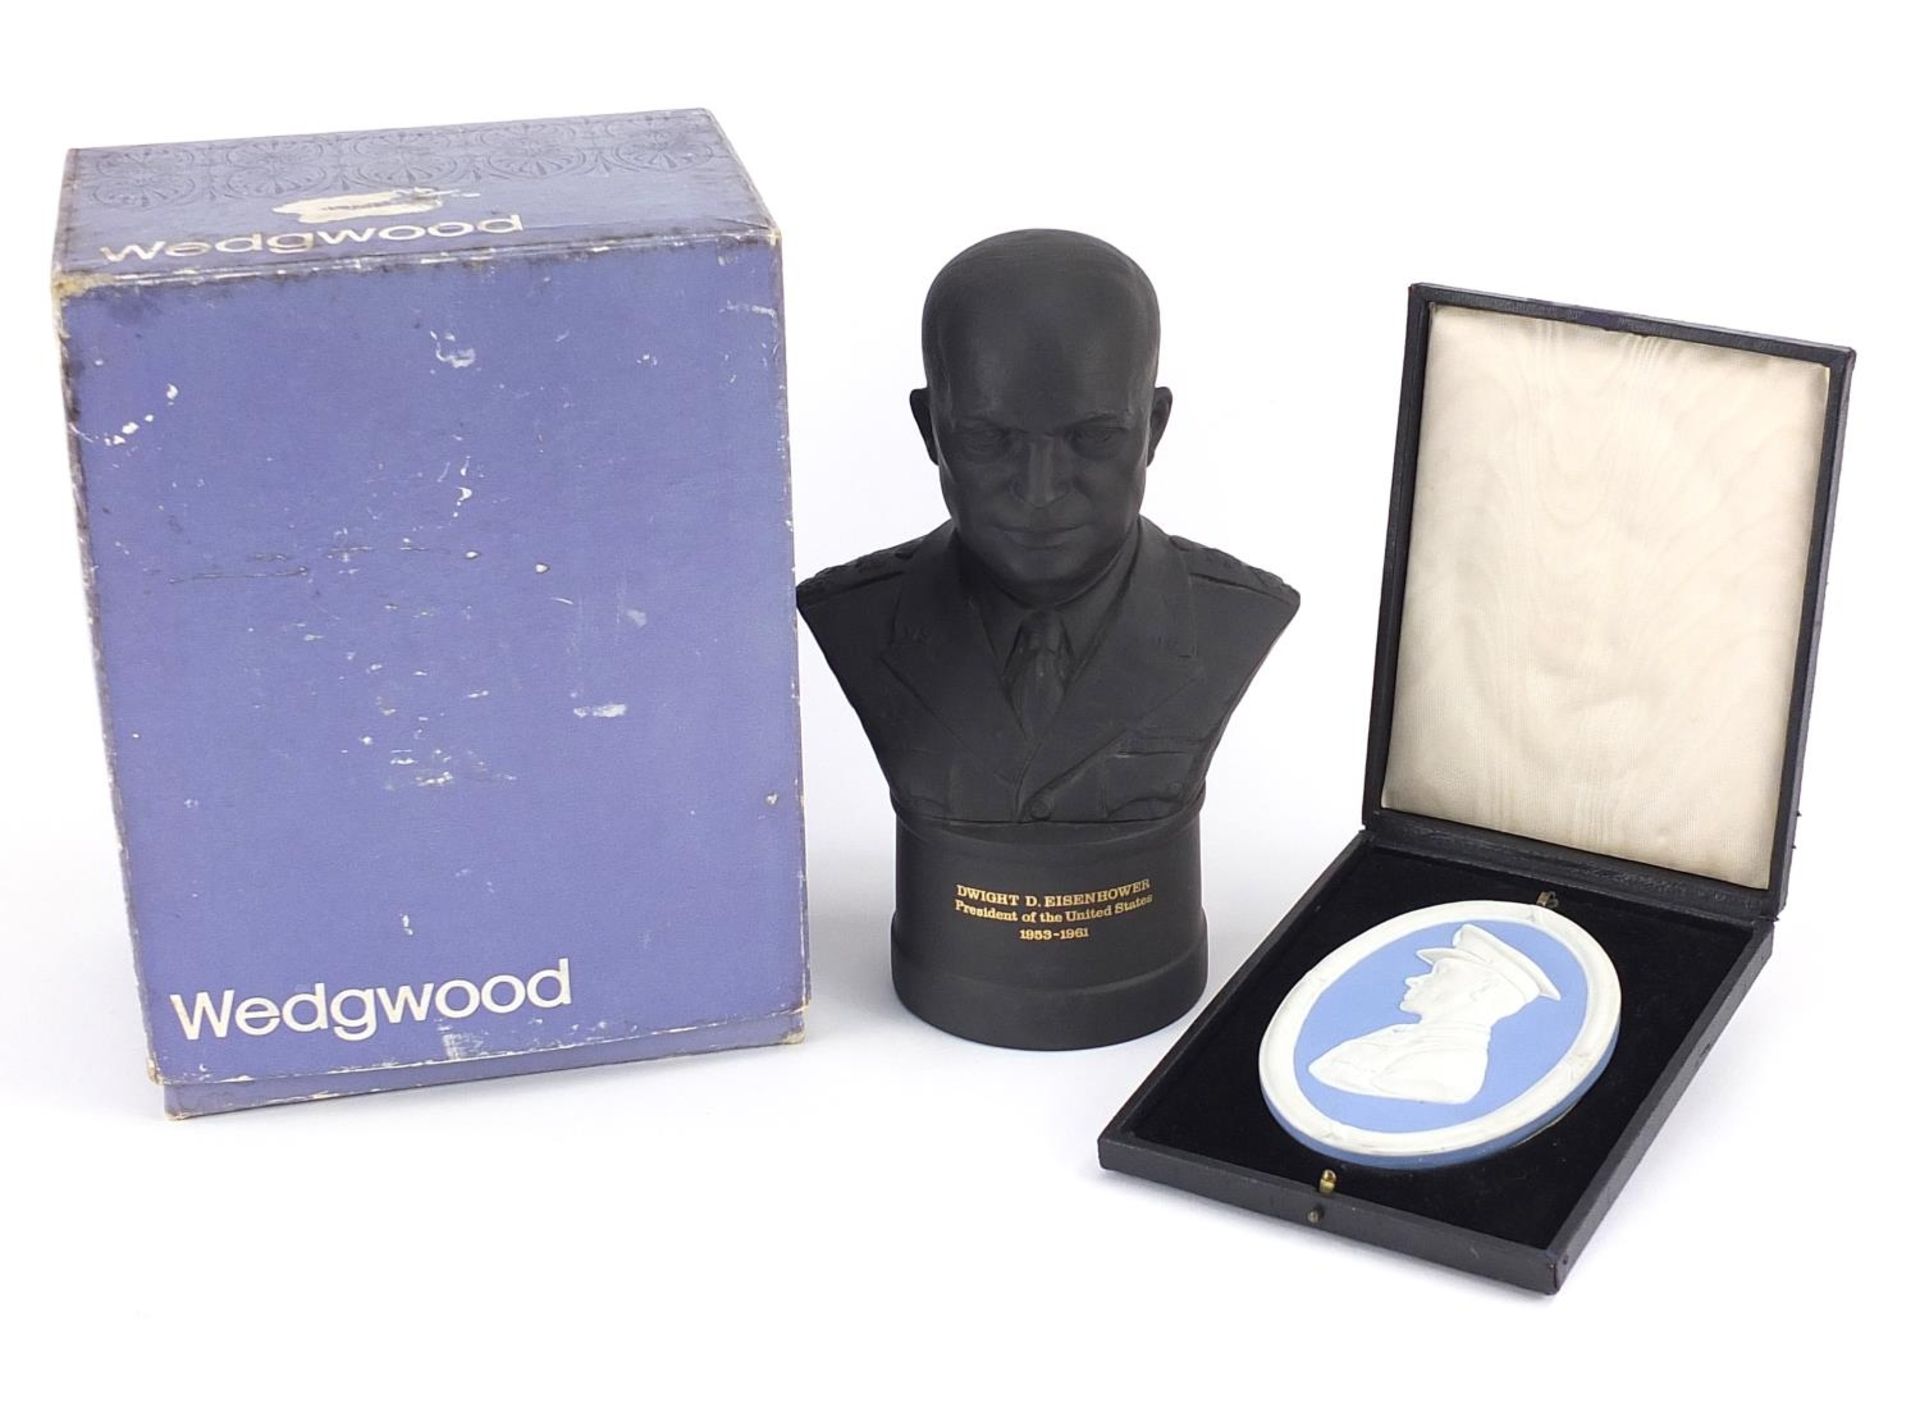 Wedgwood black basalt bust of Dwight D Eisenhower, limited edition 1307/5000, together with a